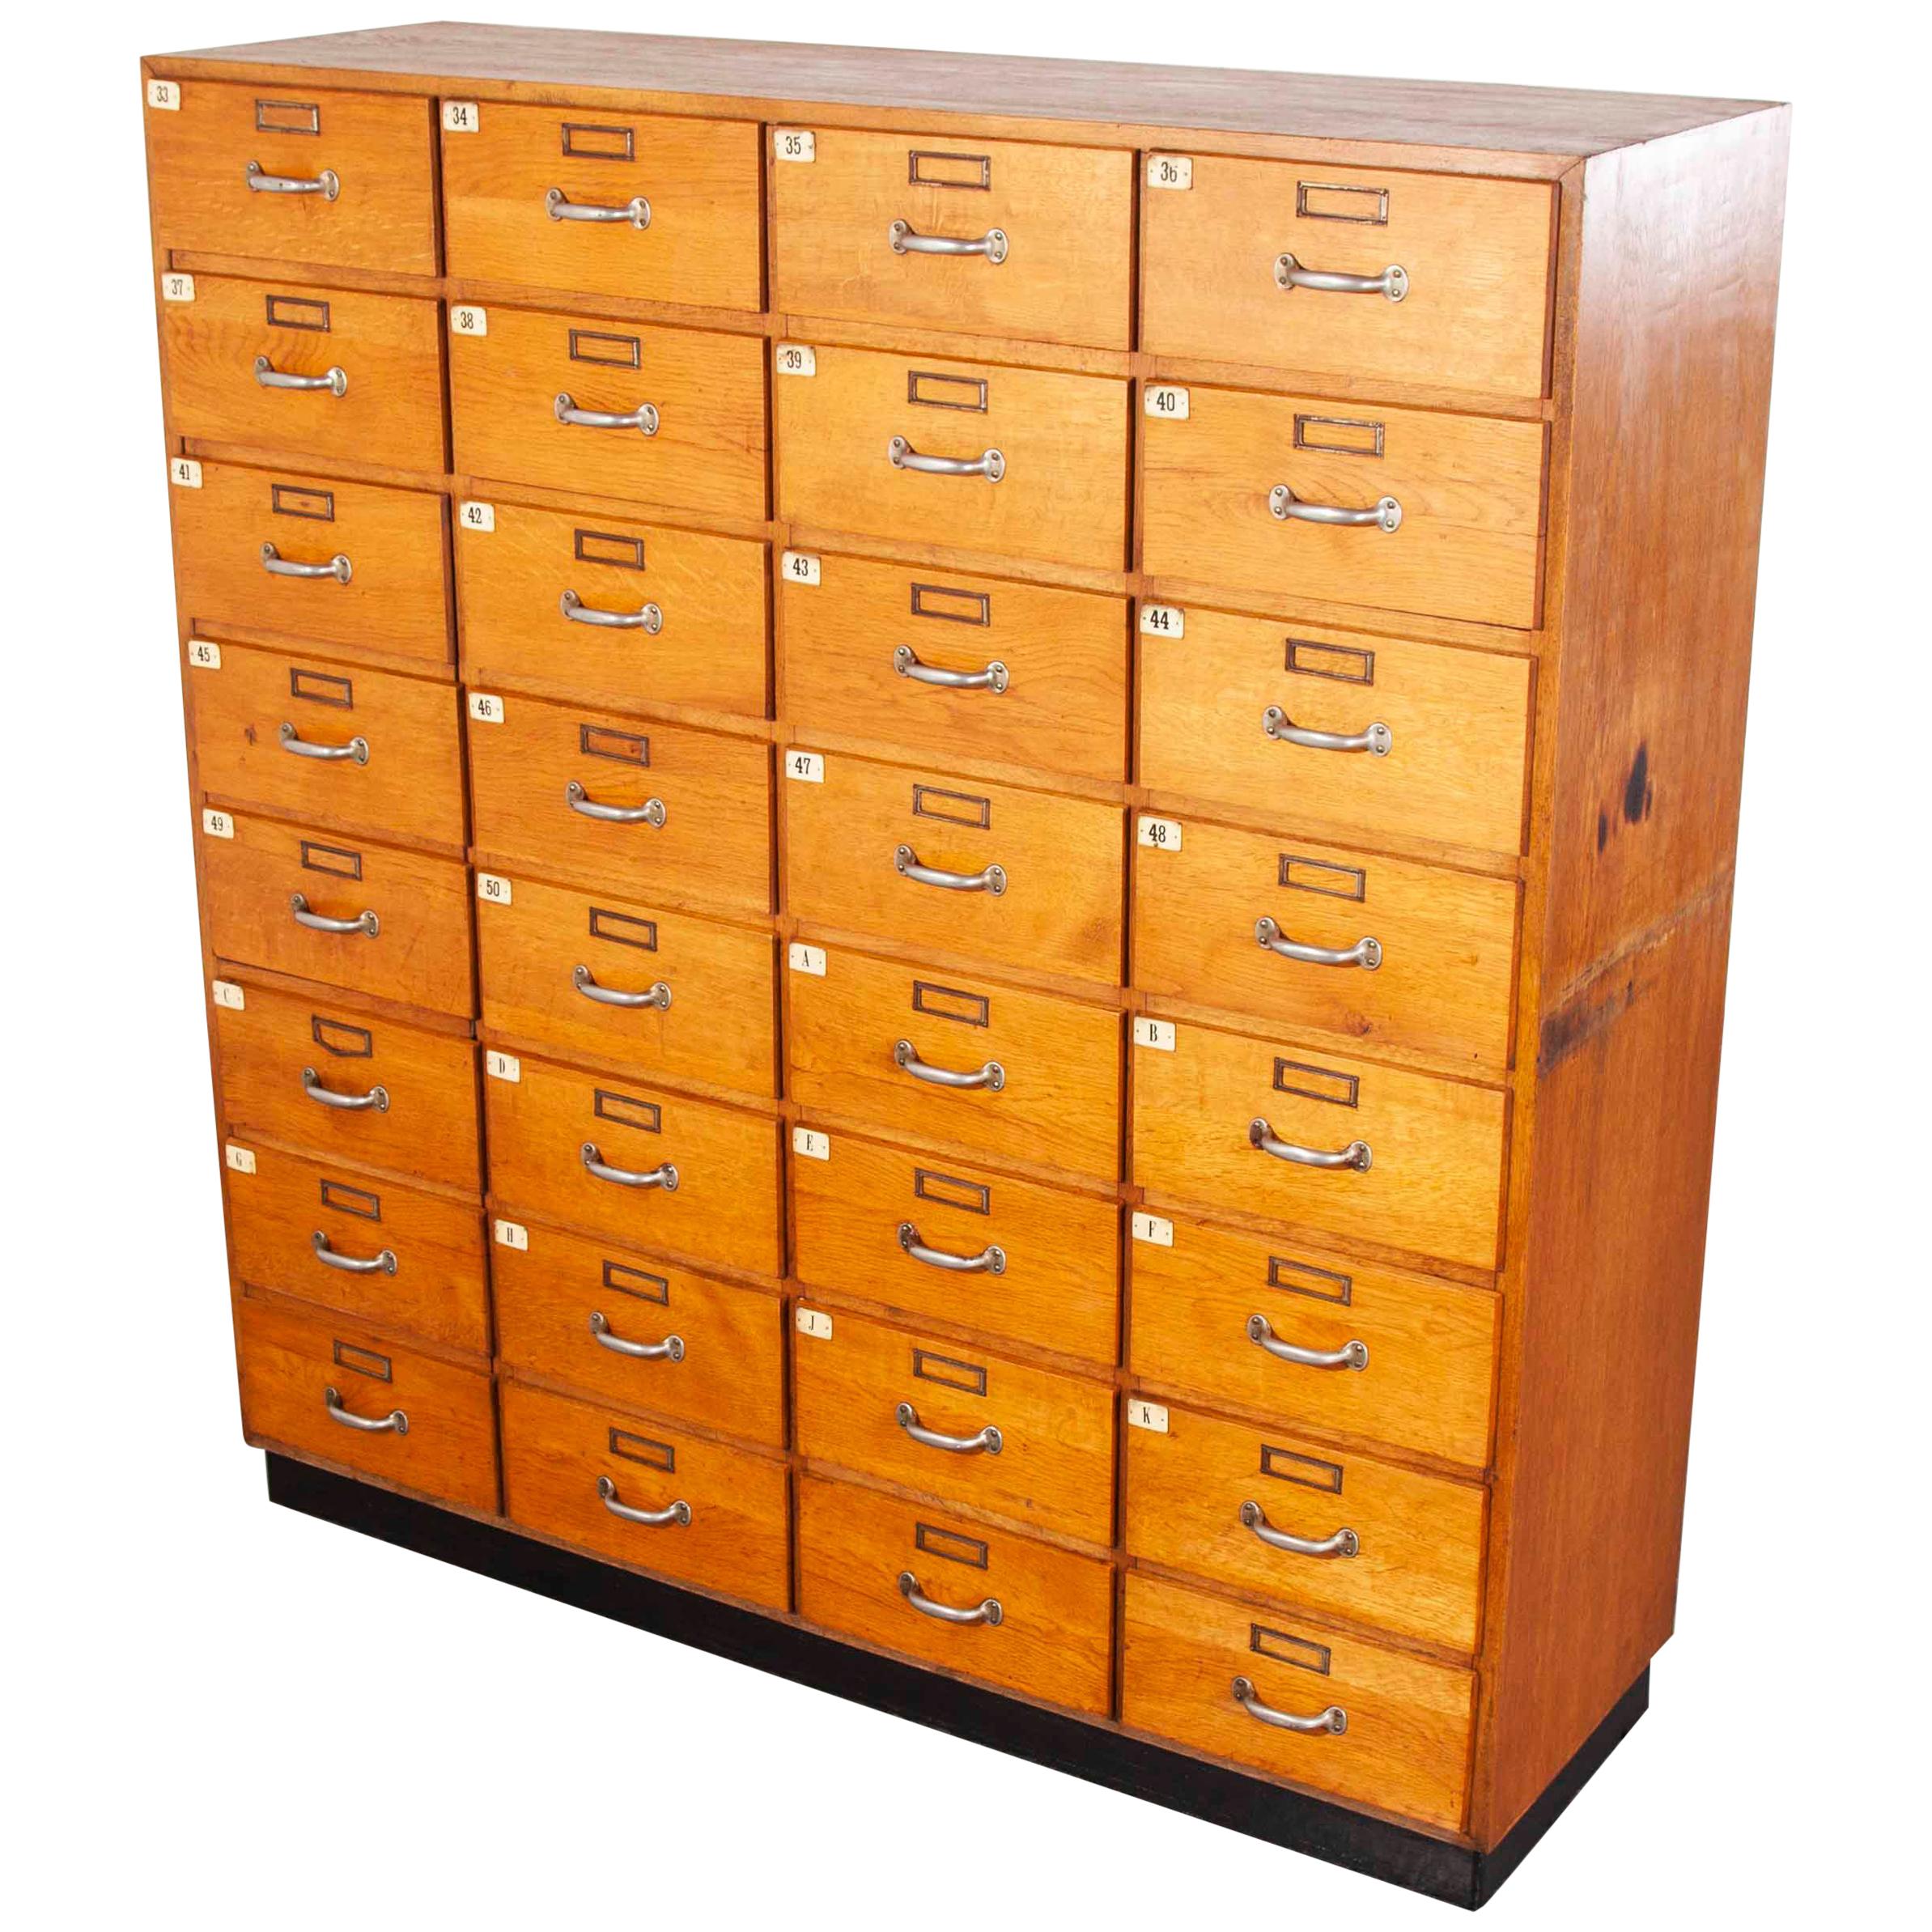 1950s Oak Apothecary Multi Drawer Chest of Drawers, Thirty Two Drawers, Unit One